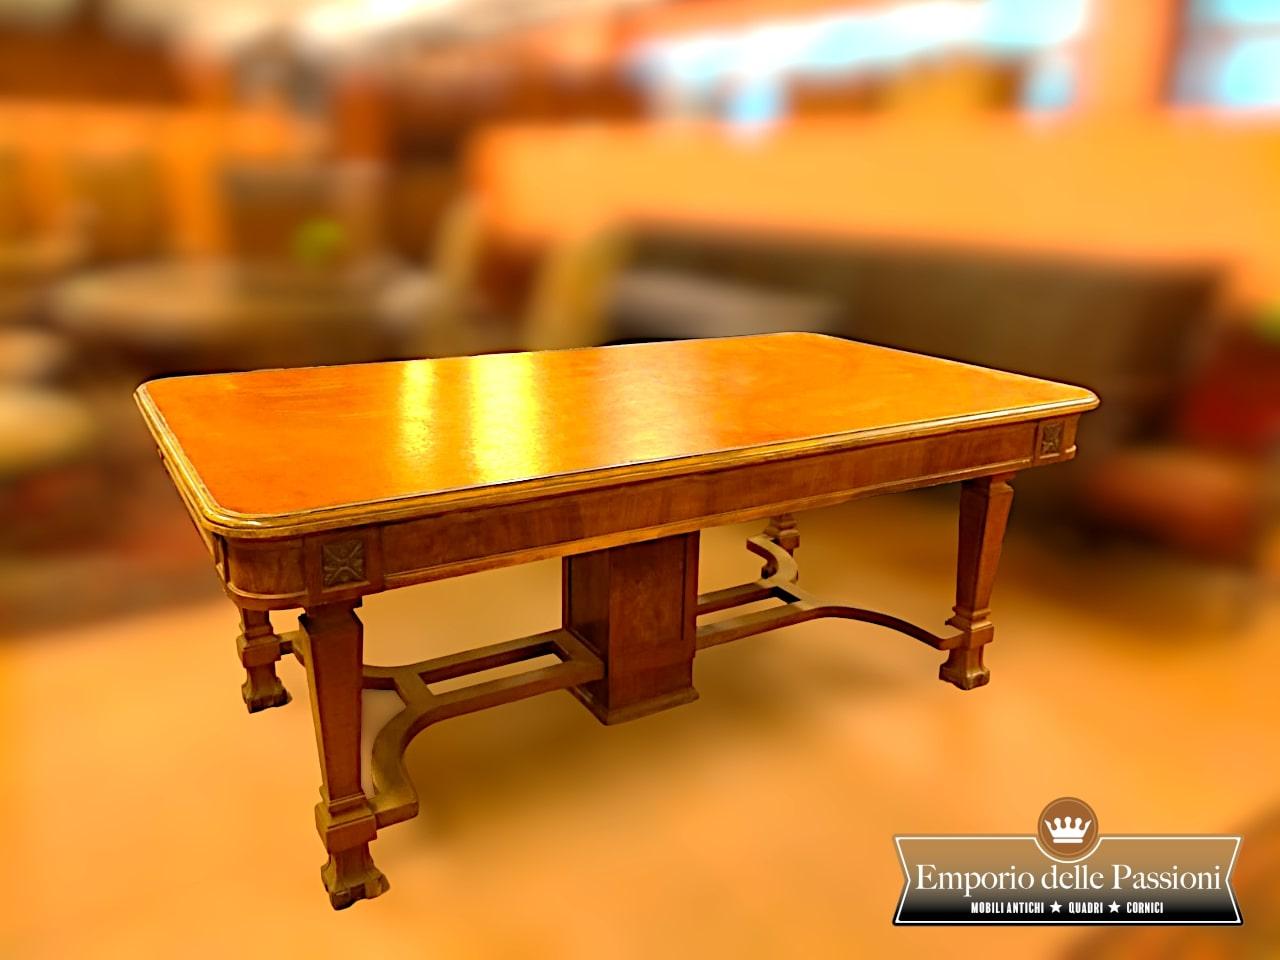 Large Eclectic Liberty Table

This large eclectic Liberty table is an elegant addition to any living space. It features distinctive stylistic elements that encompass both the Art Nouveau, Art Deco, and neoclassical movements.

The Liberty legs and